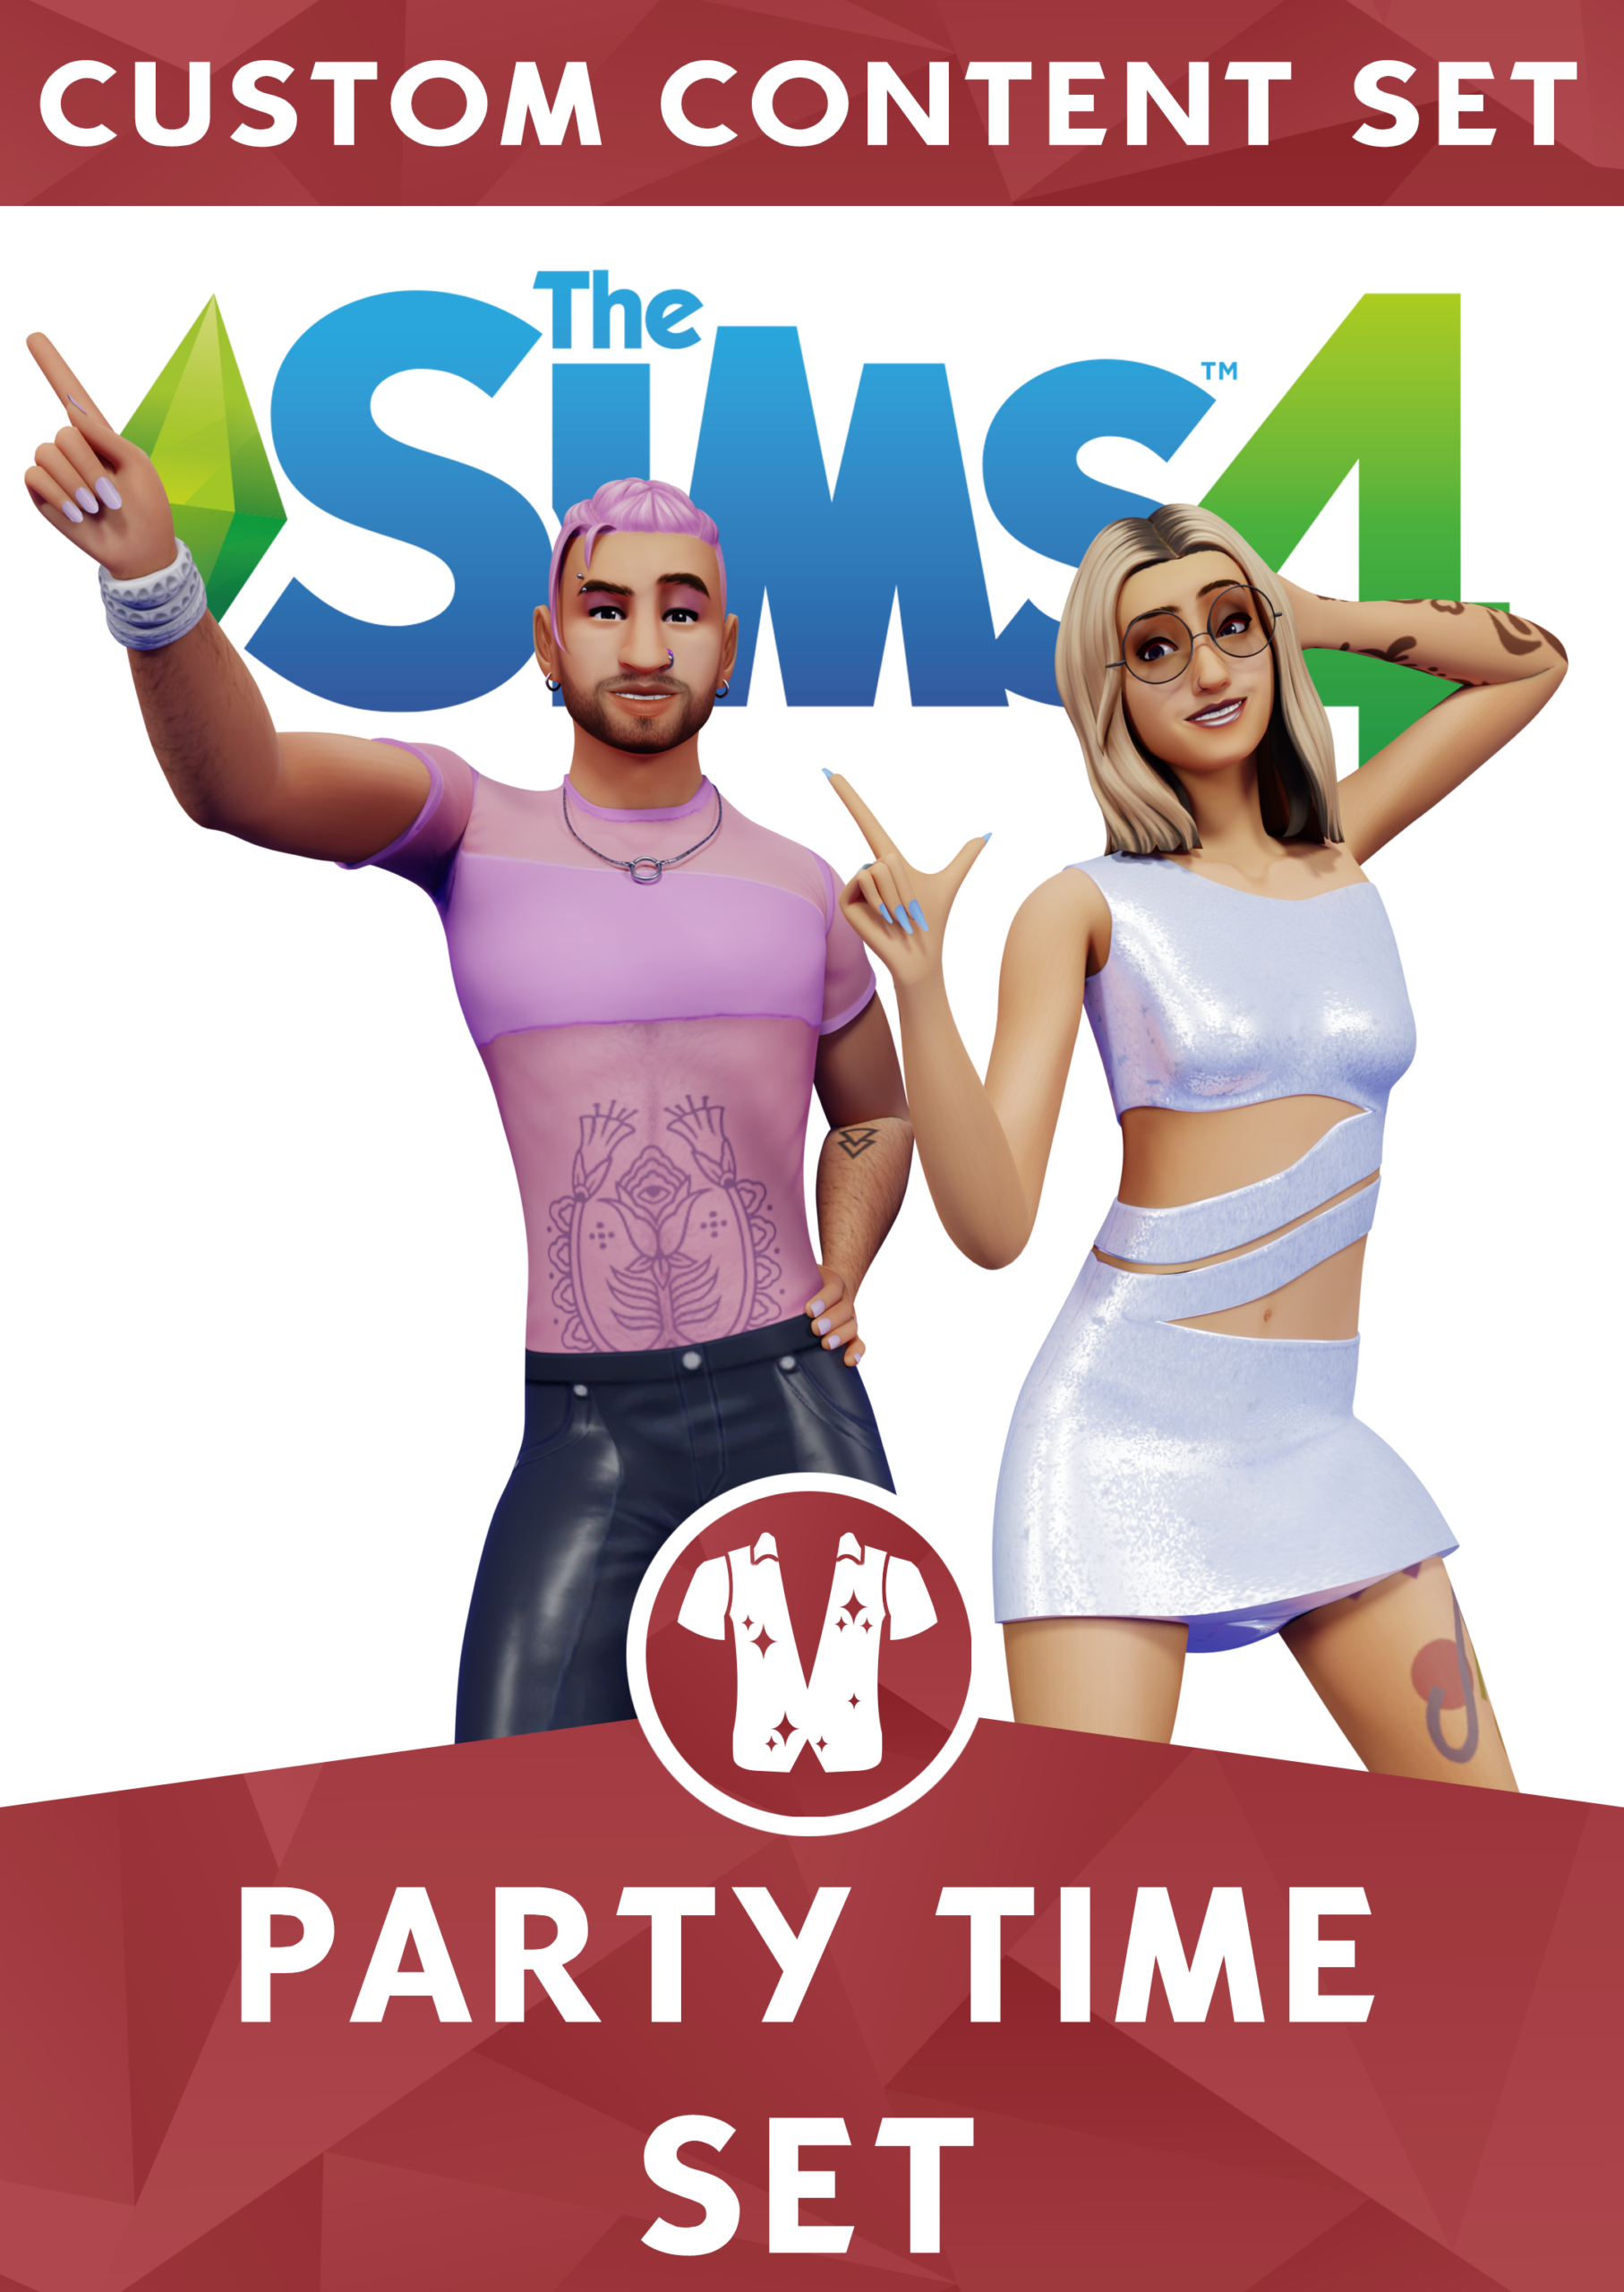 Party Time Custom Content Set